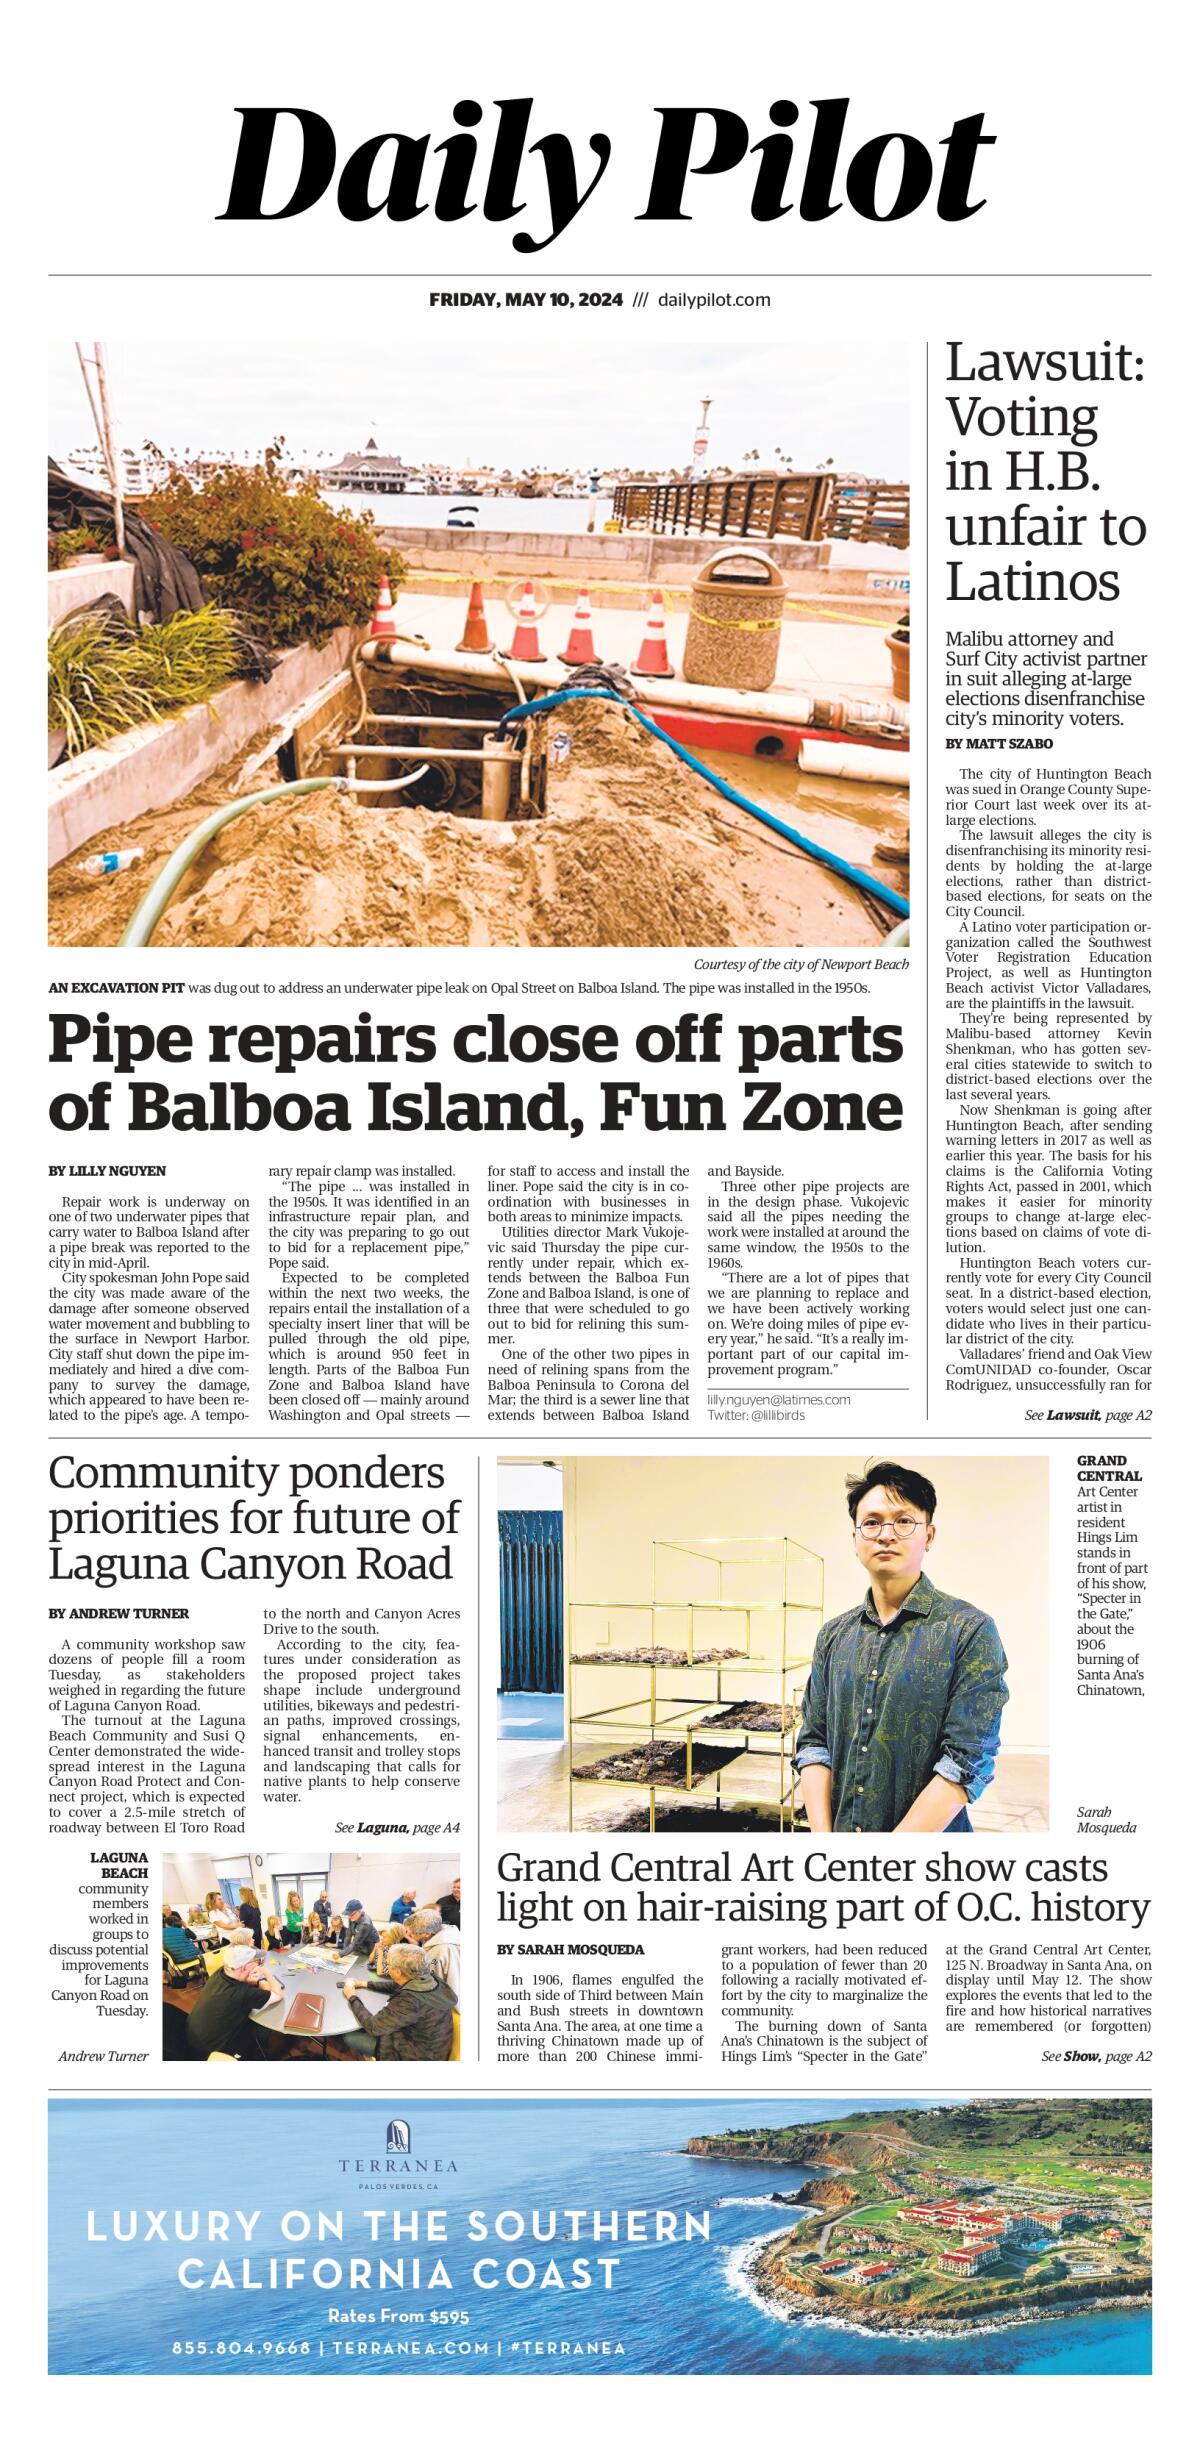 Front page of the Daily Pilot e-newspaper for Friday, May 10, 2024.